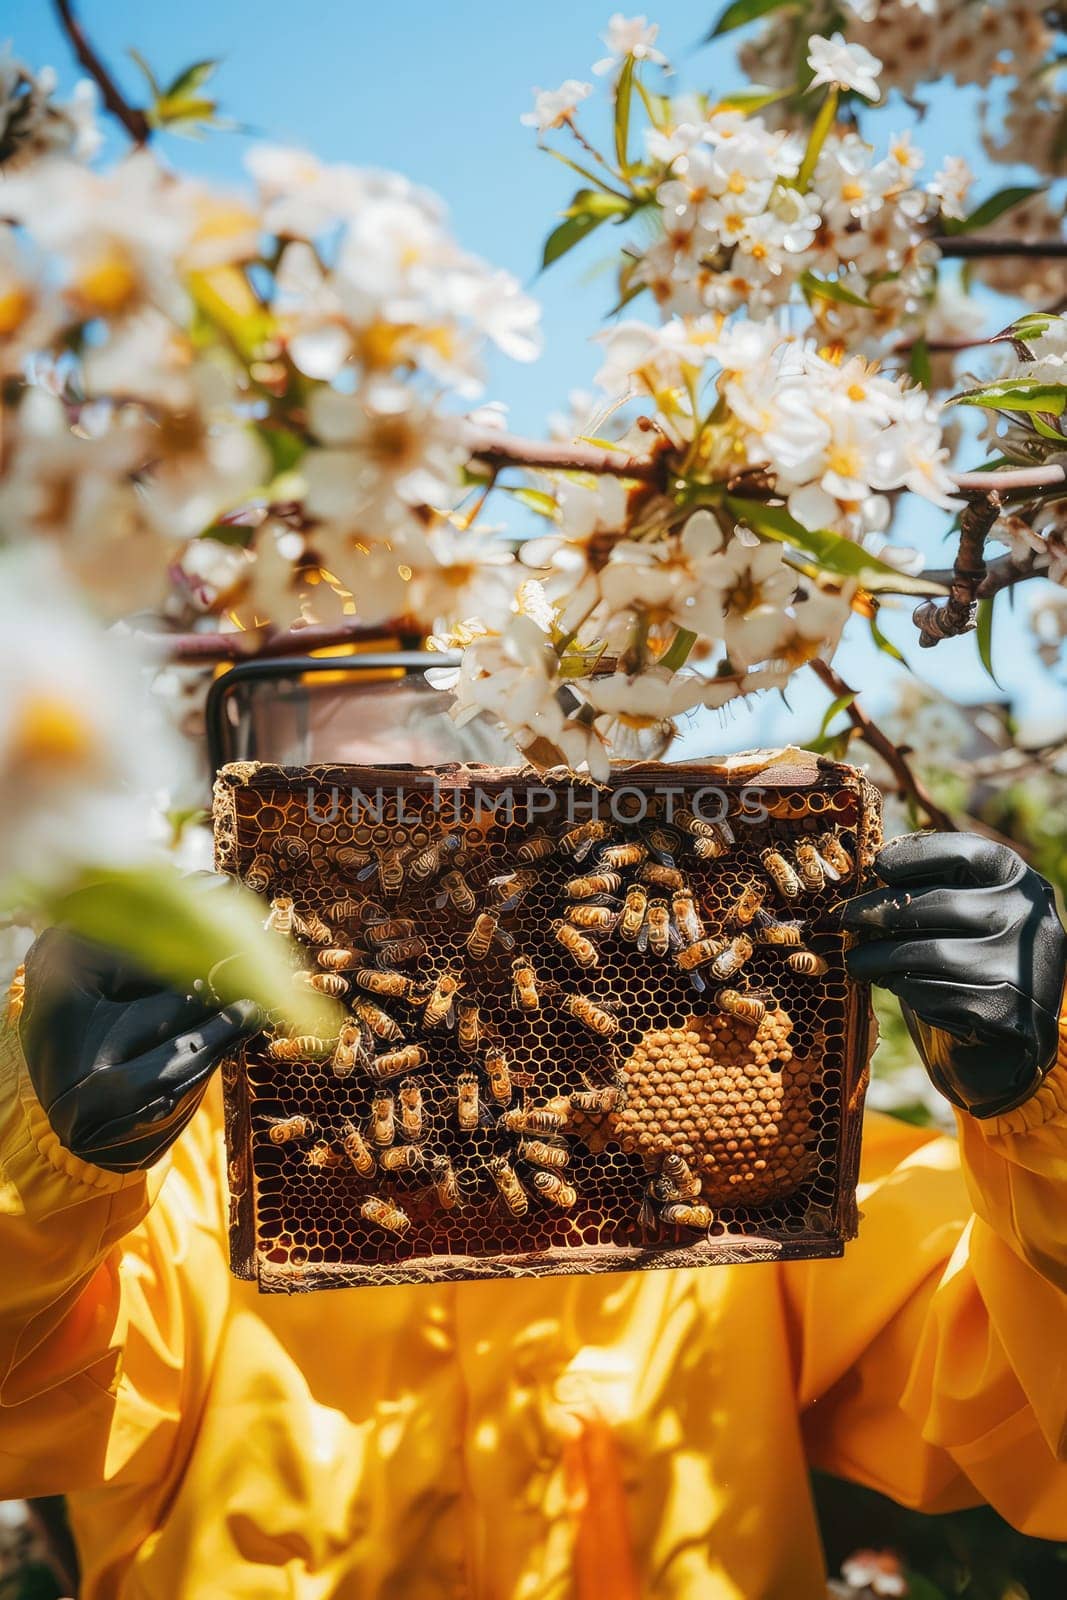 beekeeper in the apiary in a protective suit. Selective focus. nature.